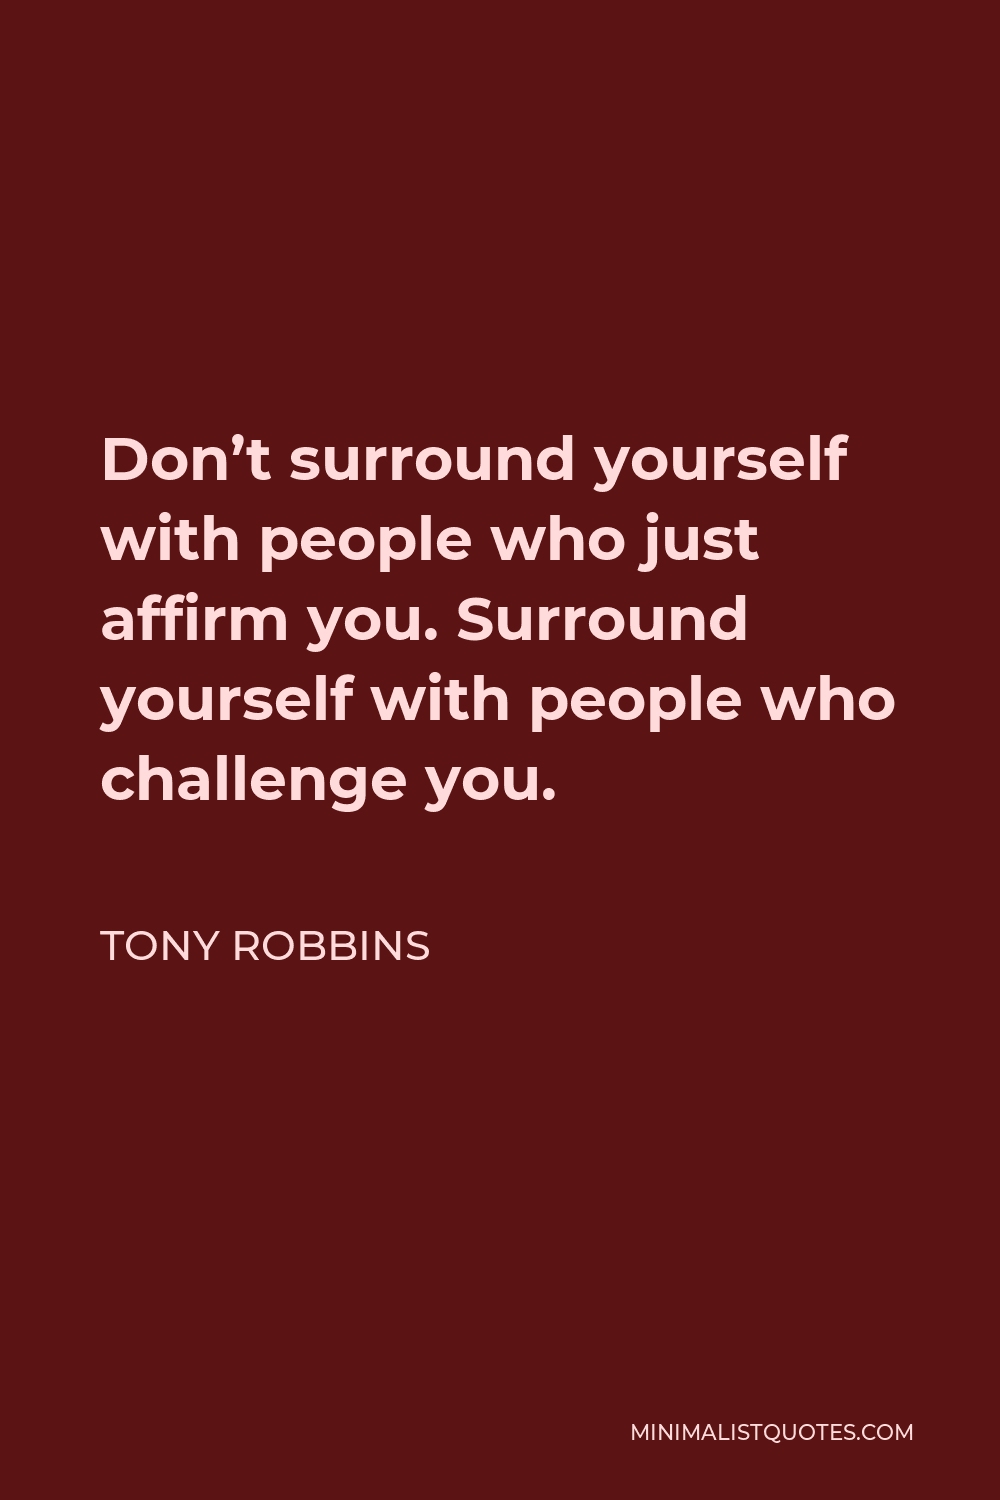 Tony Robbins Quote - Don’t surround yourself with people who just affirm you. Surround yourself with people who challenge you.